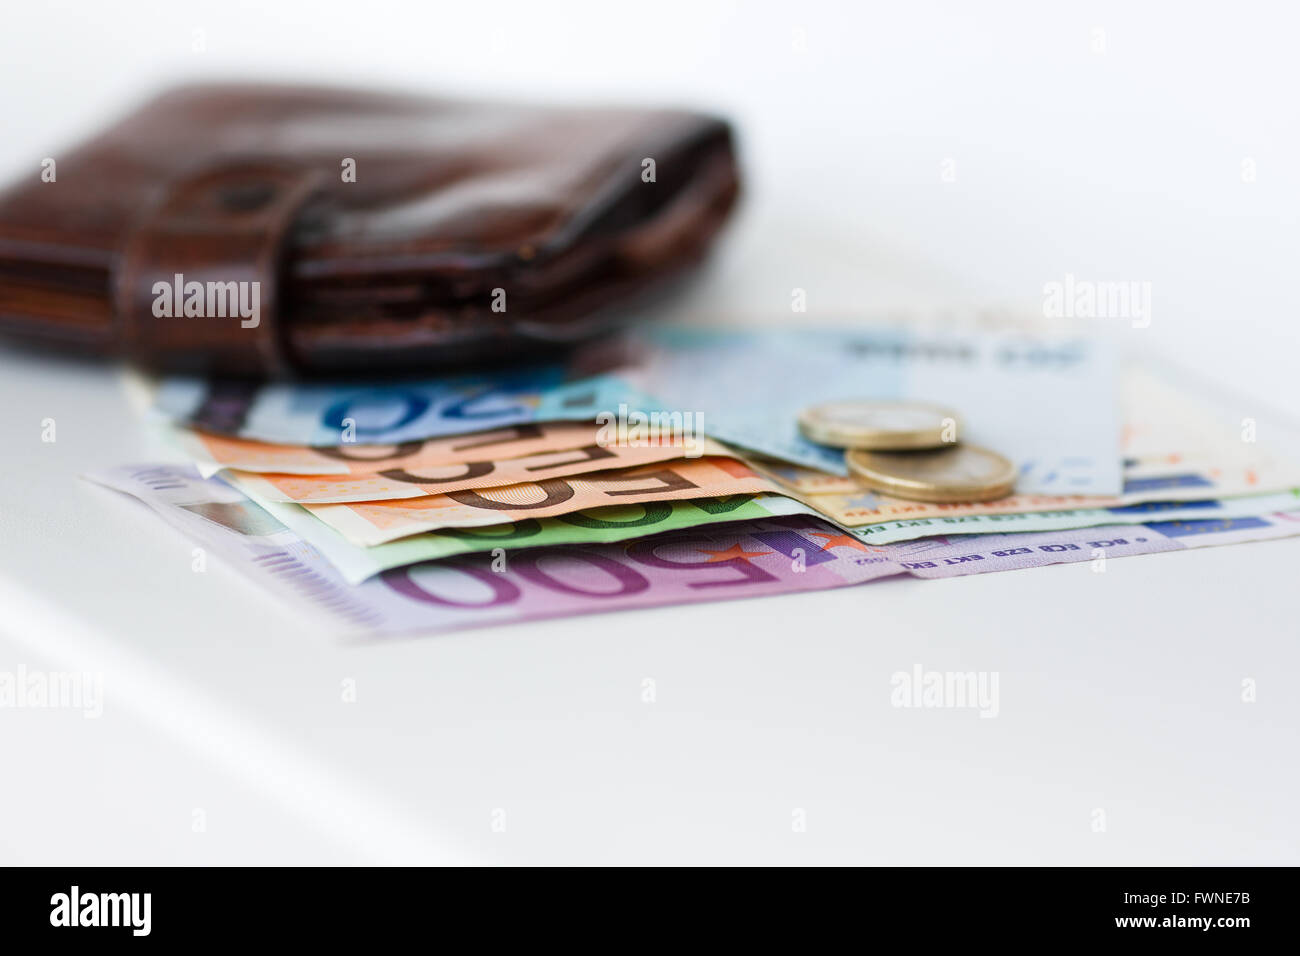 Banknotes, coins and wallet on the white background Stock Photo